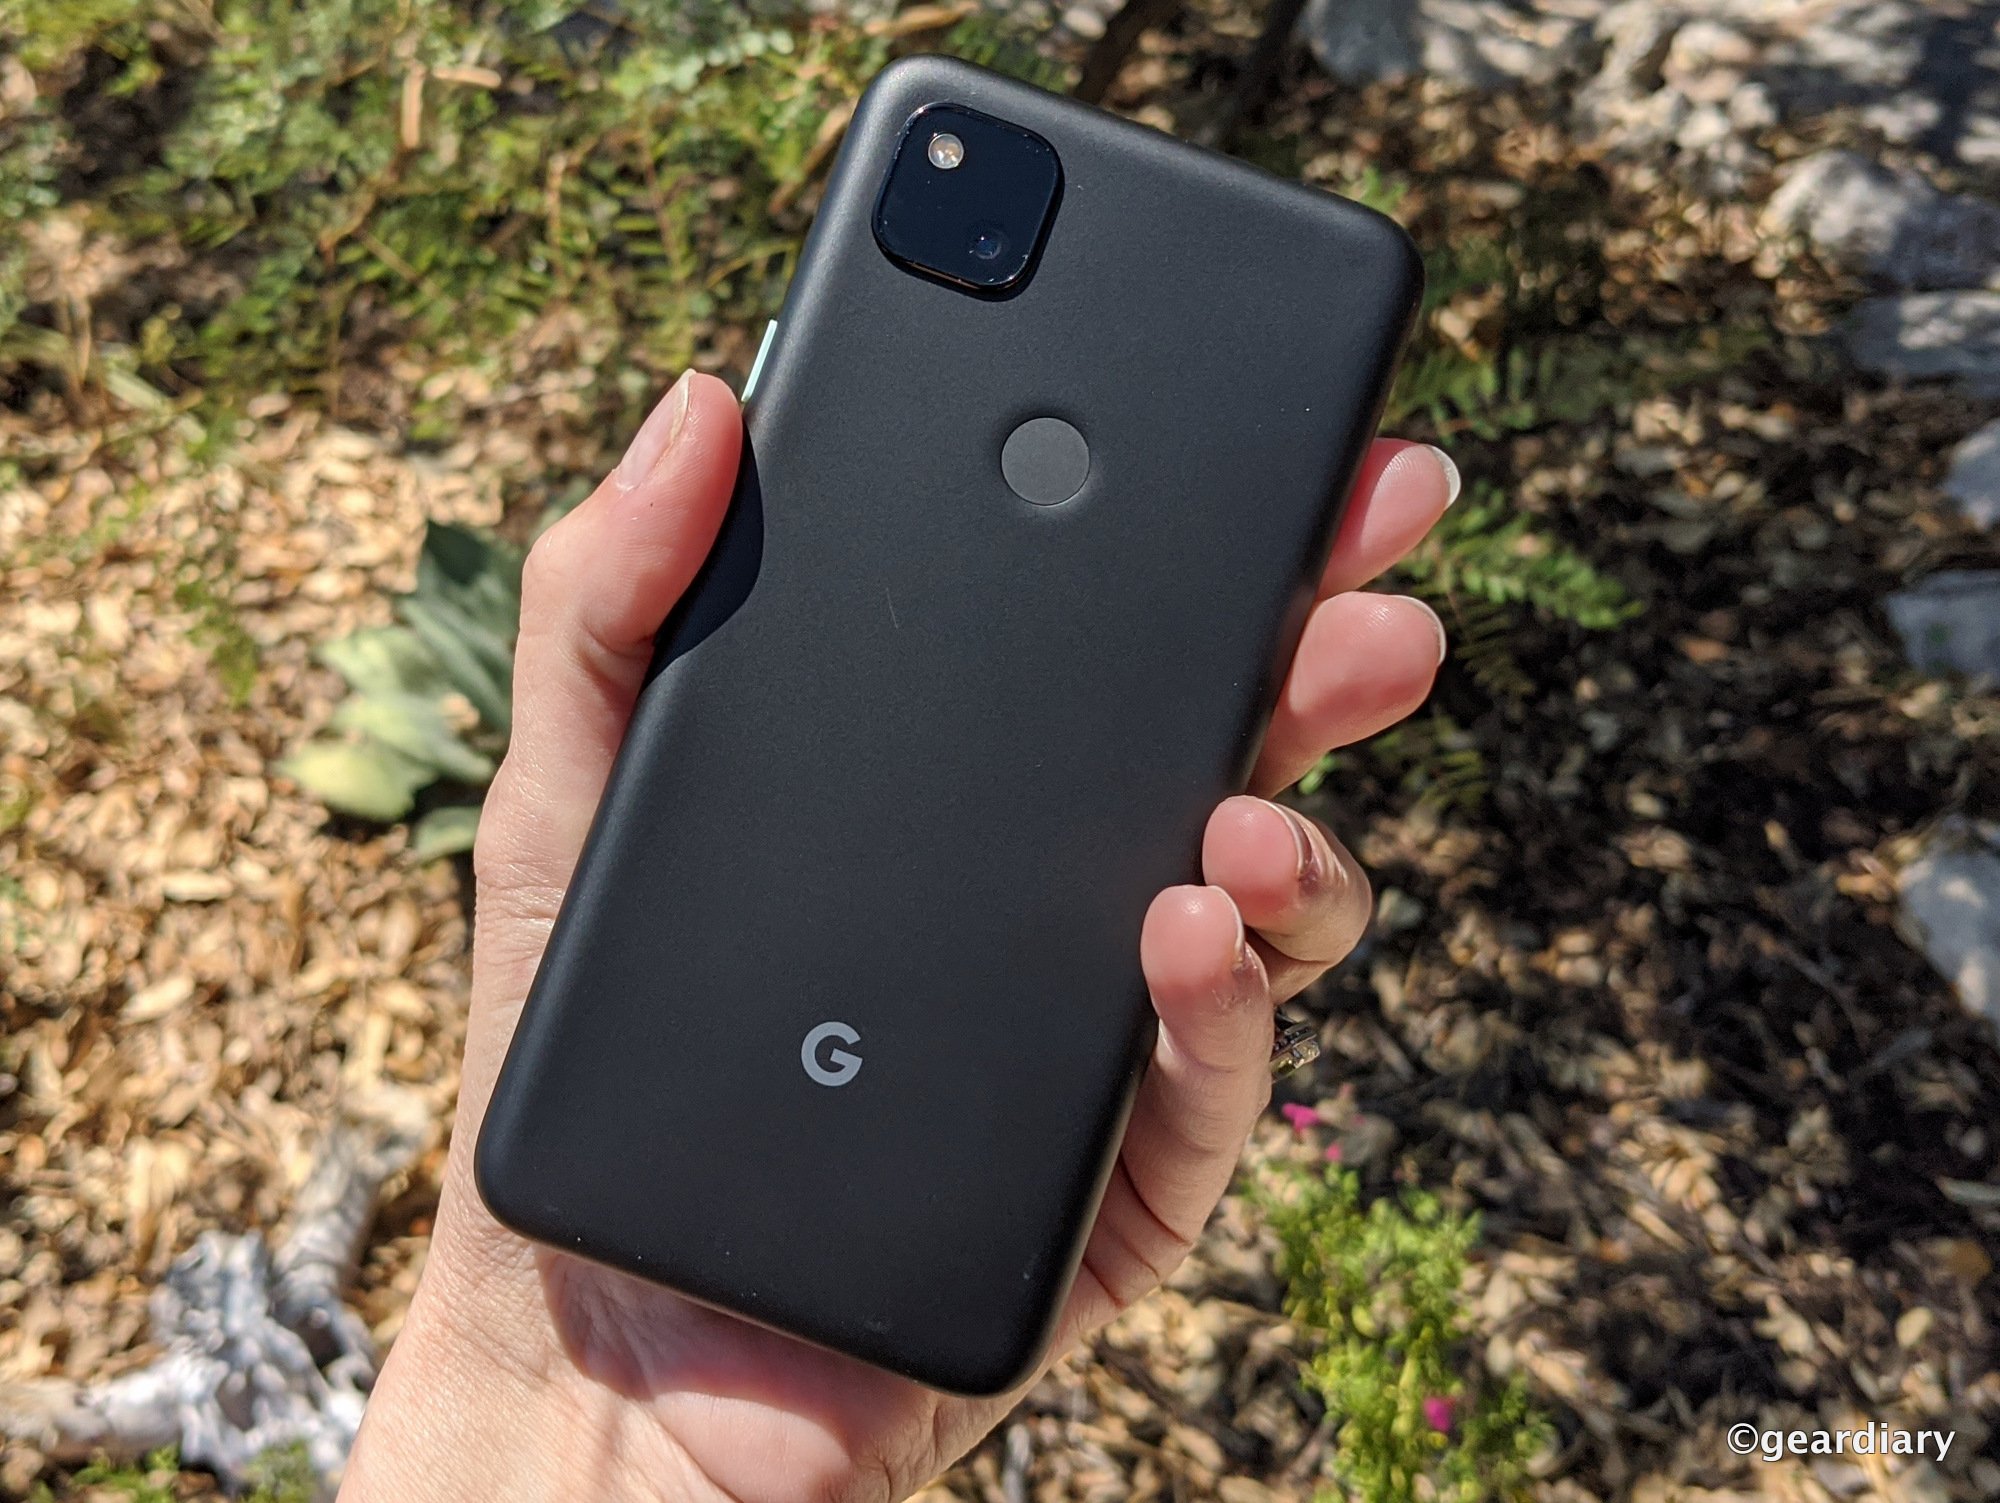 The Google Pixel 4a Is Now Available, and It's a Spectacular Value at ...